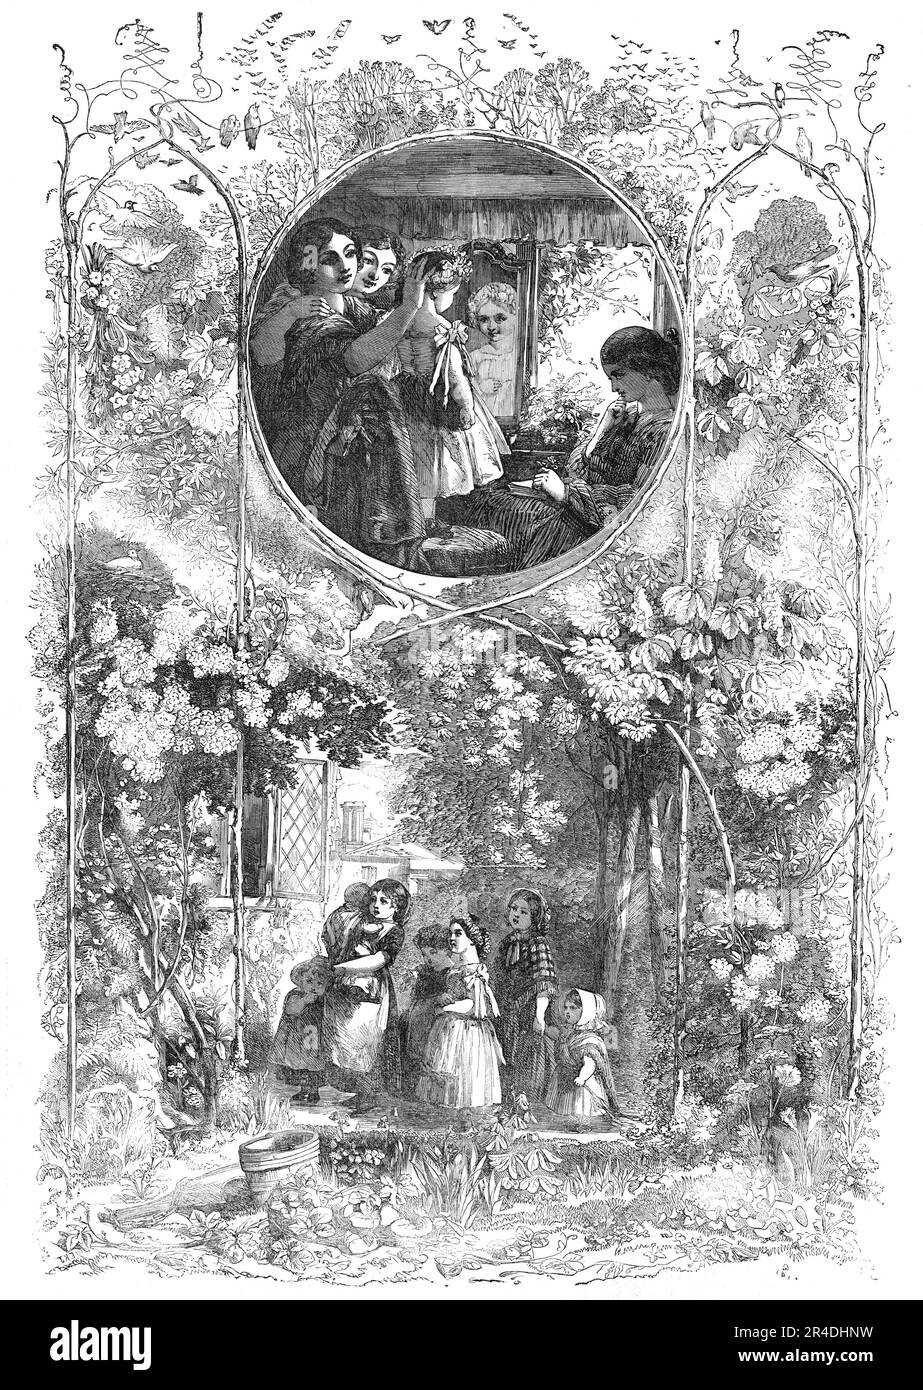 The May Queen, and Going A-Maying, 1856. May Day is a European festival of ancient origins marking the beginning of summer, usually celebrated on 1 May, approximately halfway between the spring equinox and summer solstice. Traditions include gathering wildflowers and green branches, weaving floral garlands, crowning a May Queen, and setting up a Maypole, May Tree or May Bush, around which people dance. From &quot;Illustrated London News&quot;, 1856. Stock Photo